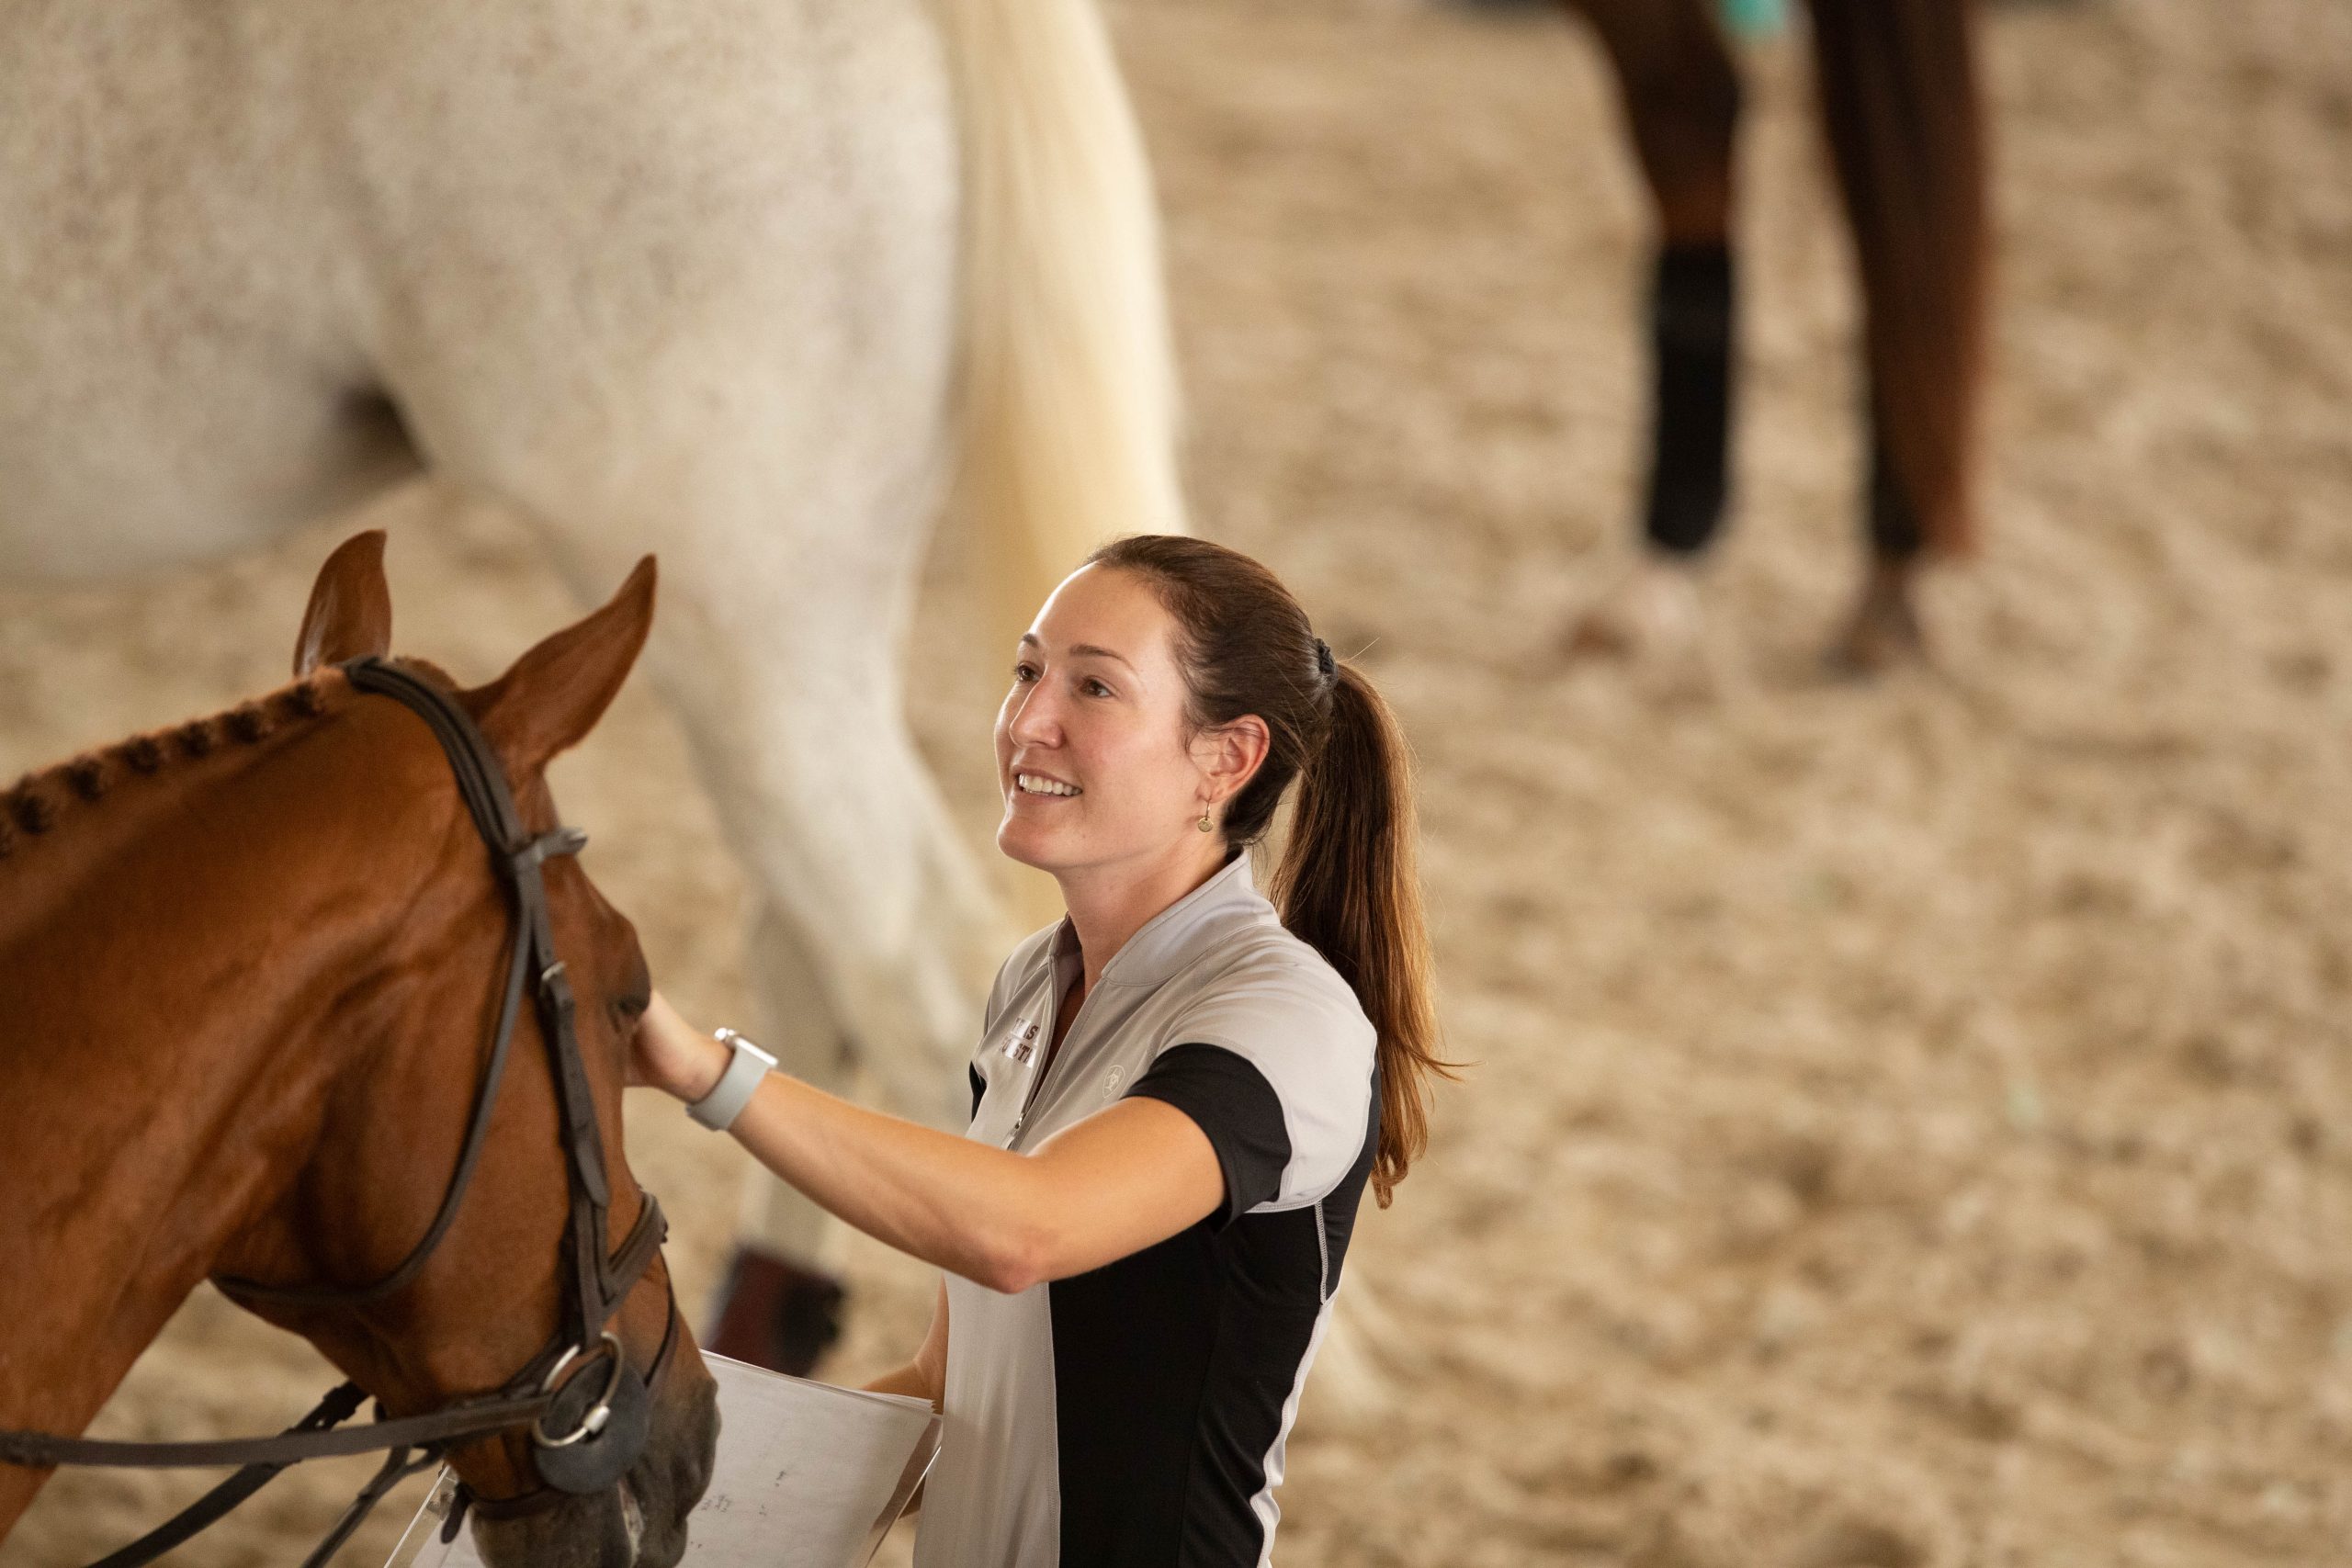 GALLERY%3A+Equestrian+Maroon+%26+White+Scrimmage